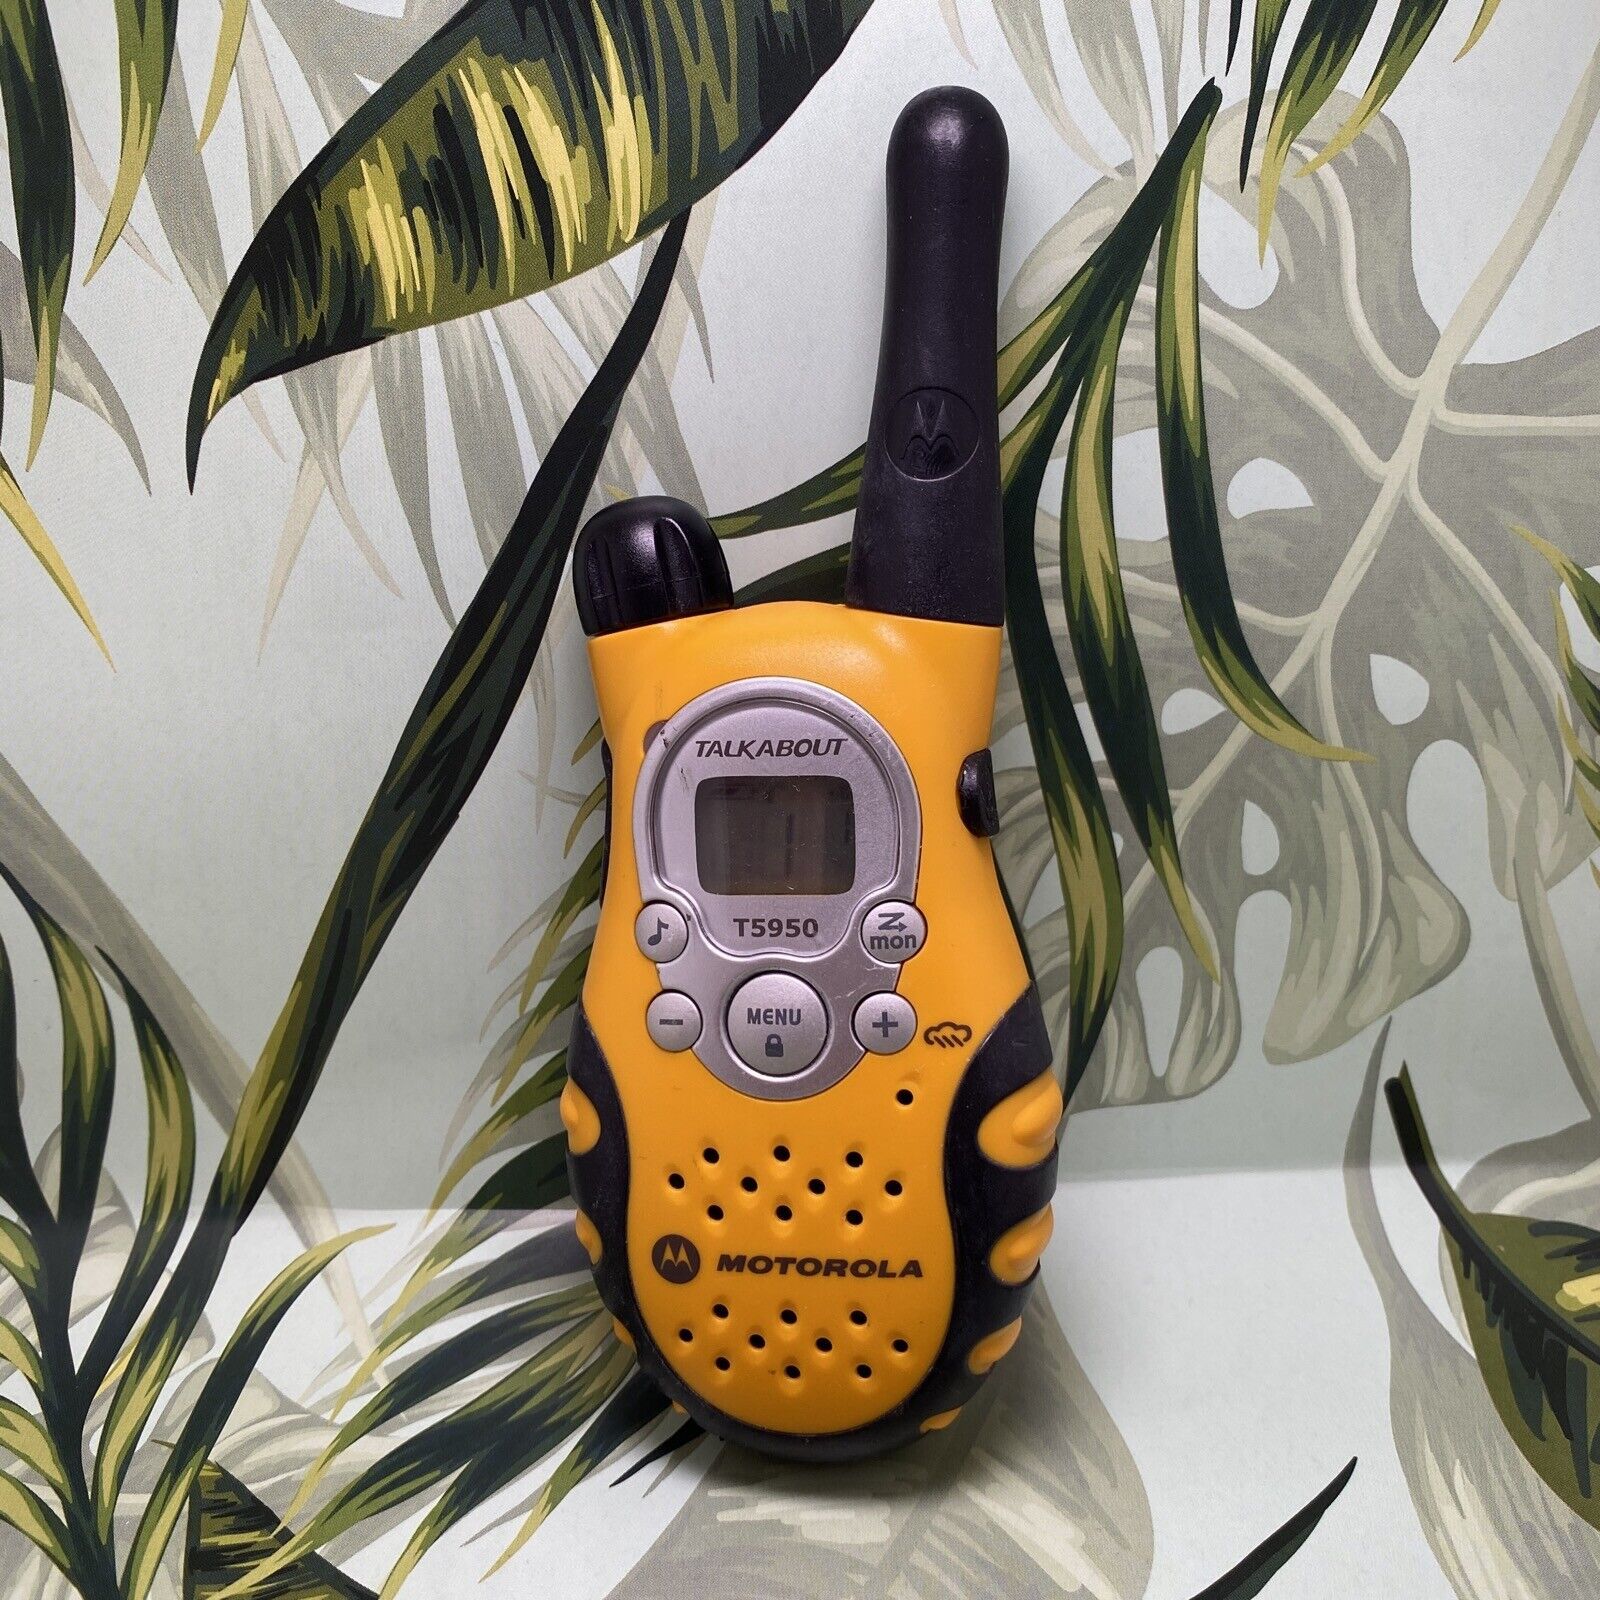 Primary image for Motorola Talkabout T5950 2-Way Radio Walkie Talkies - Single Yellow TESTED Works